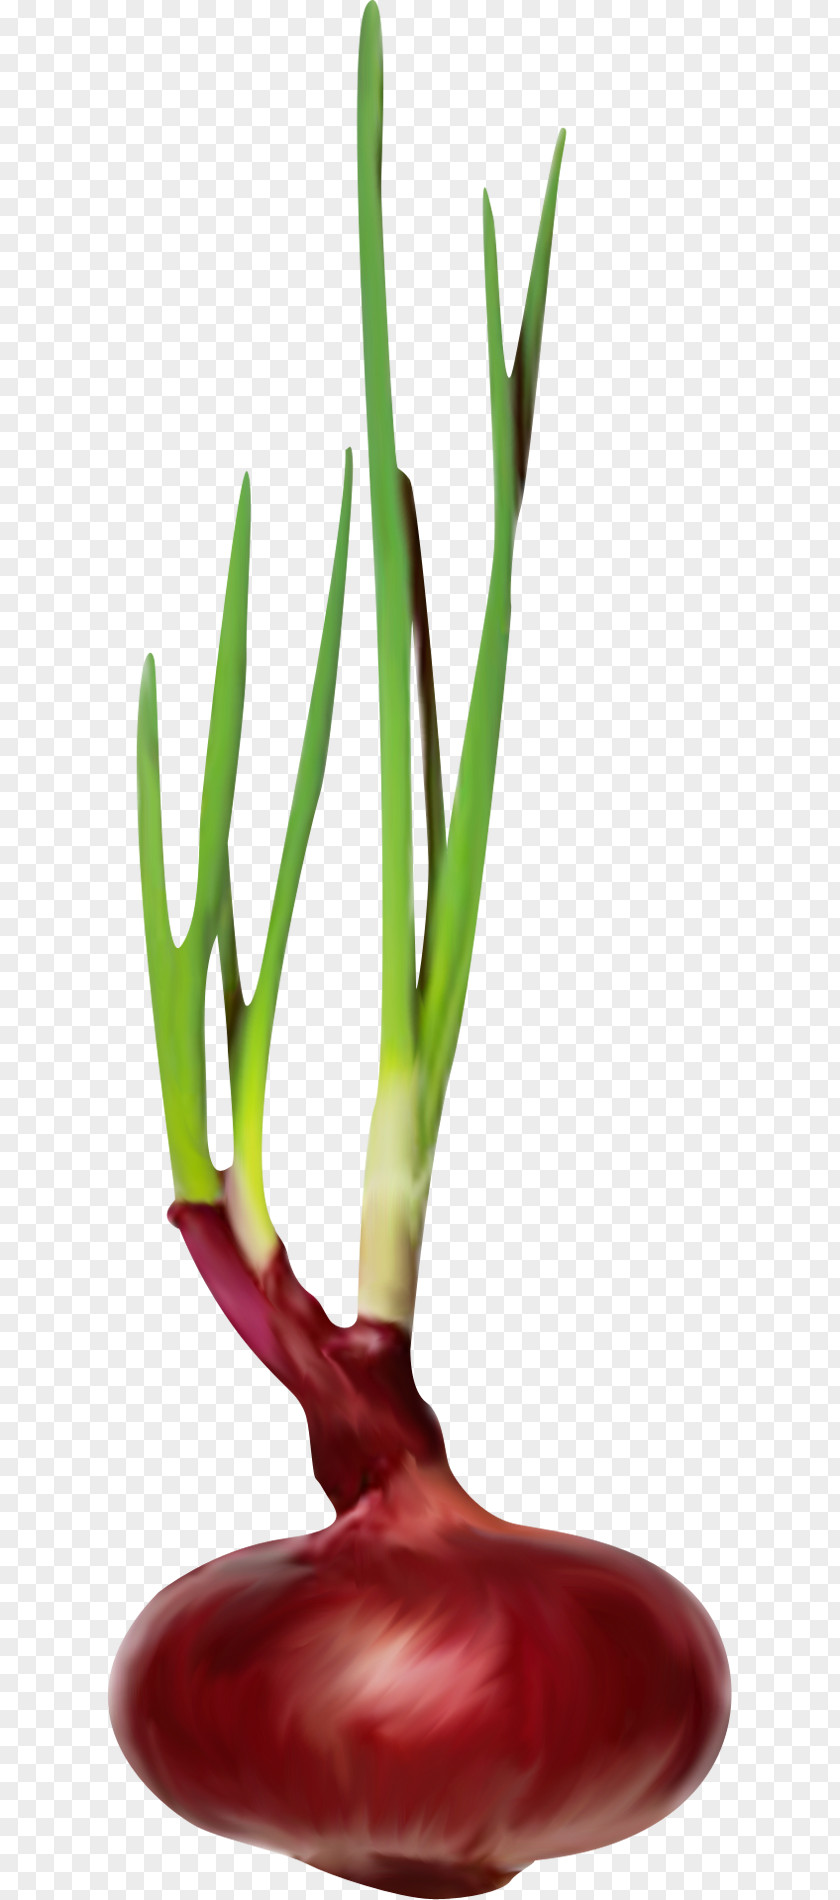 Onion Green Leaves Chili Pepper Scallion PNG